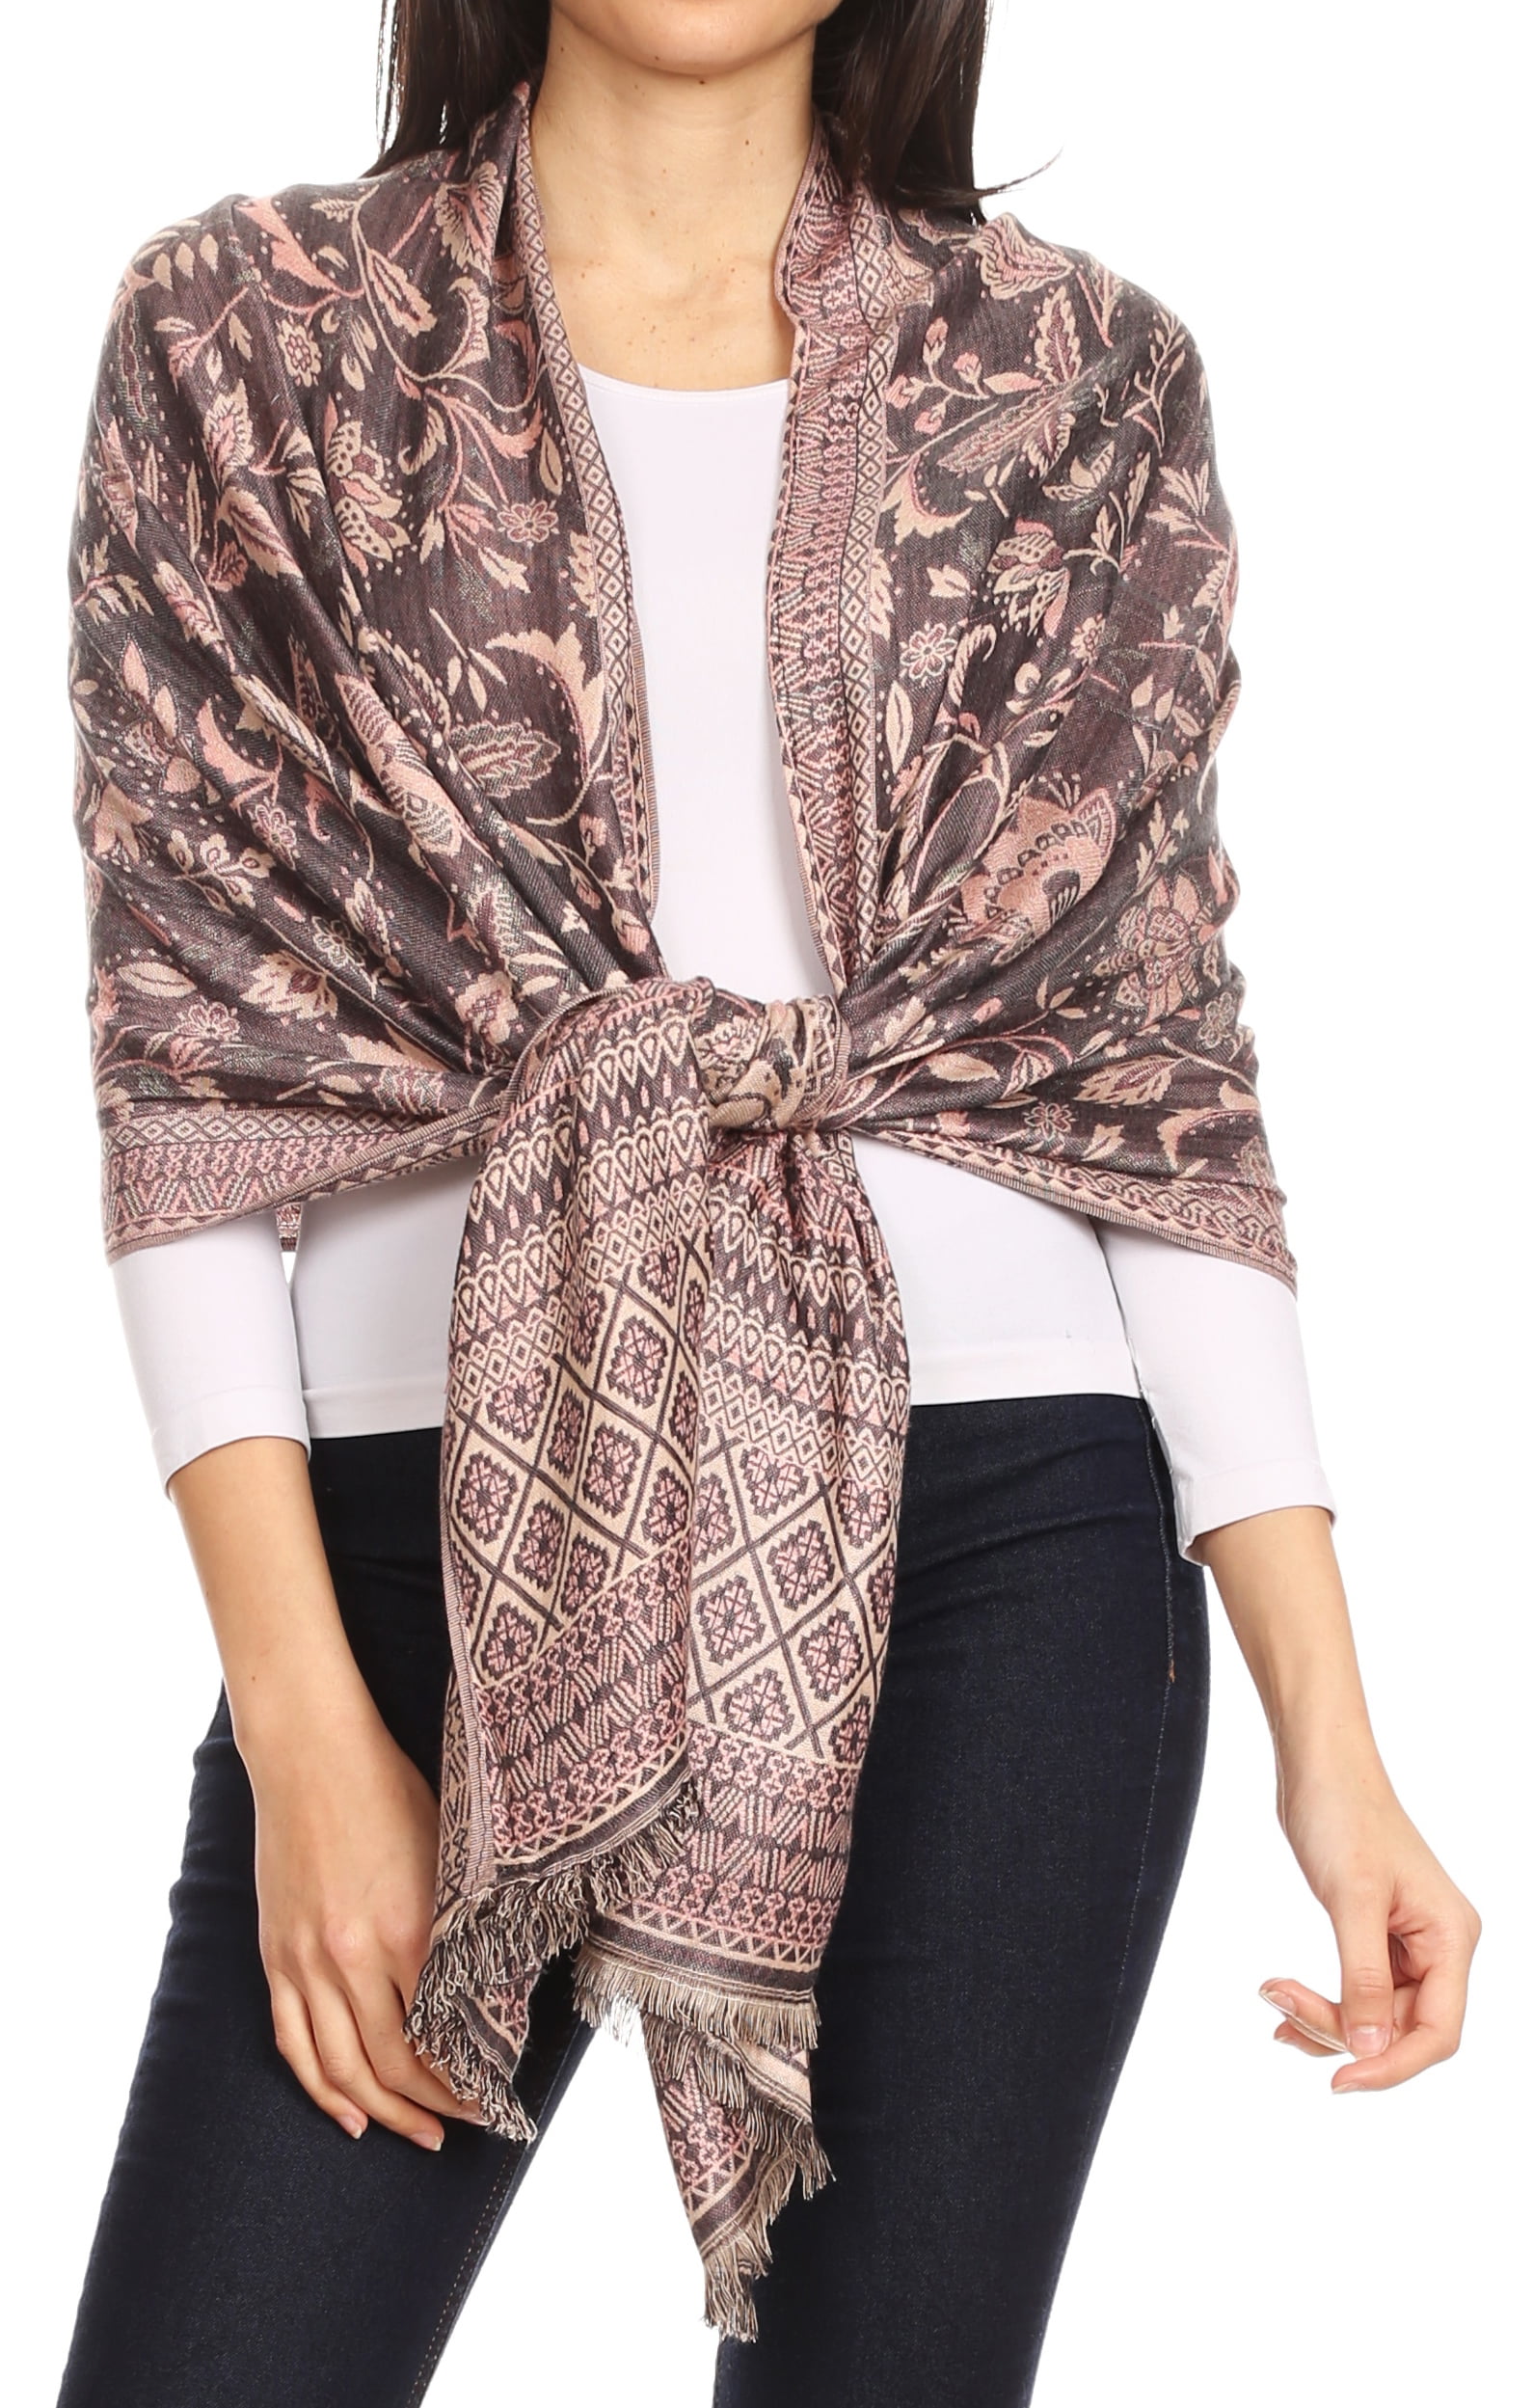 Hot 2019 Style Women's Double-Side Butterfly Pashmina Shawl/Scarf Wrap